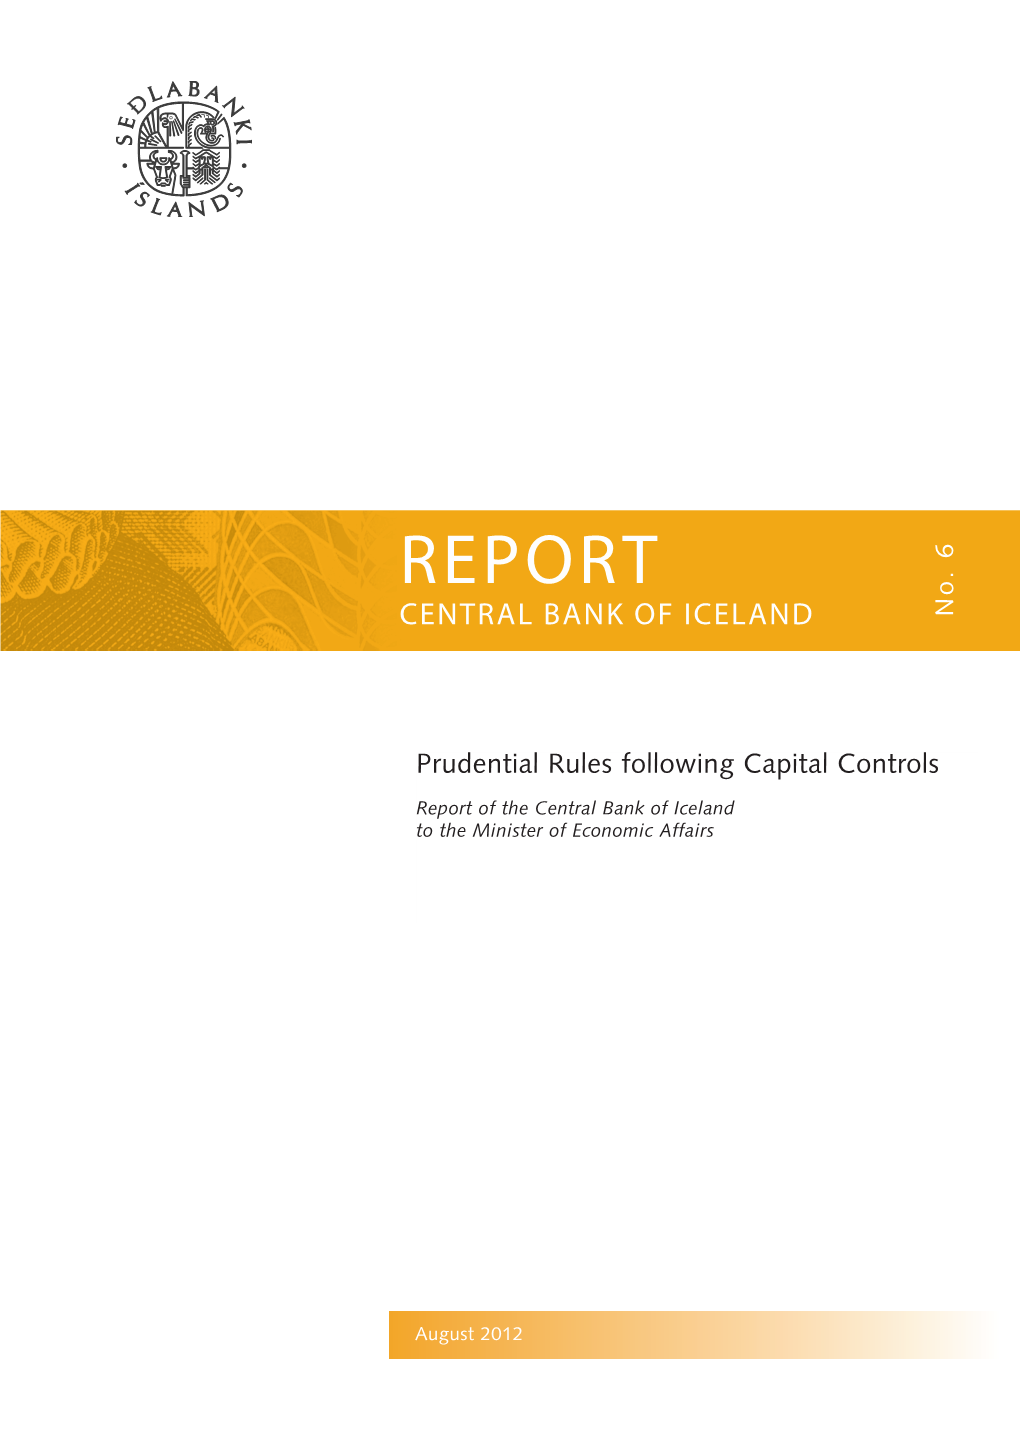 Prudential Rules Following Capital Controls. Report of the Central Bank